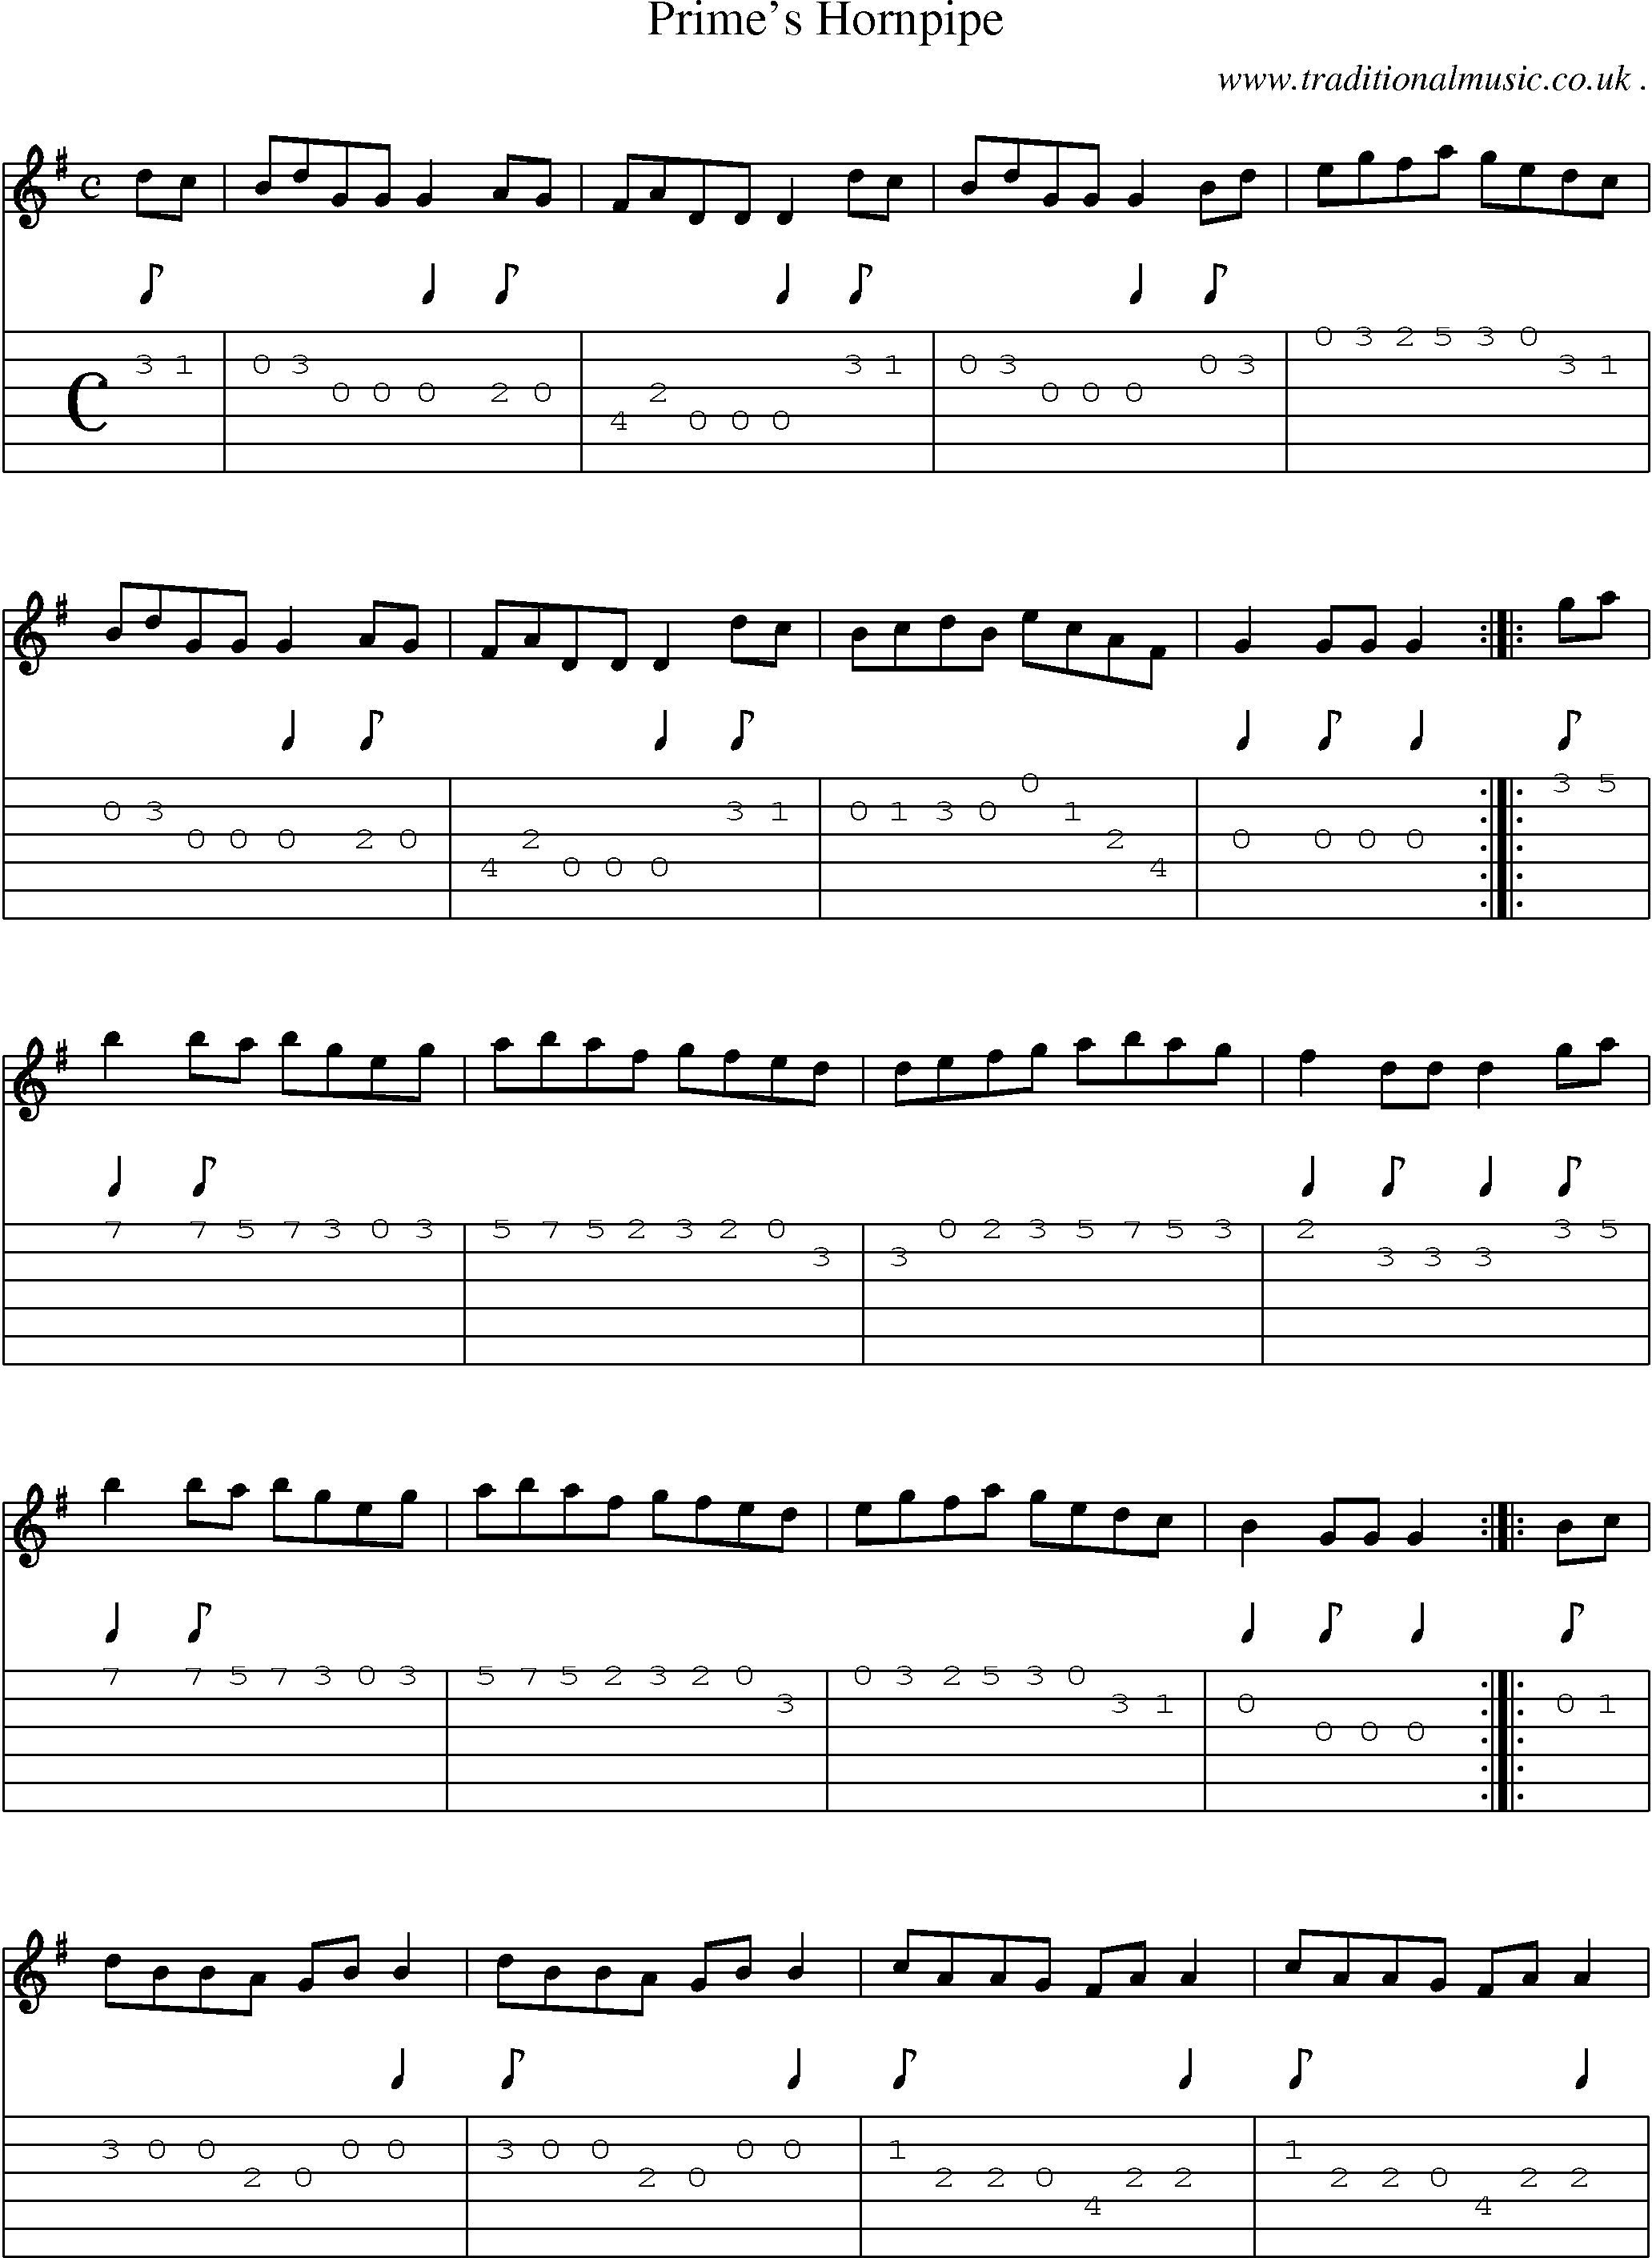 Sheet-Music and Guitar Tabs for Primes Hornpipe